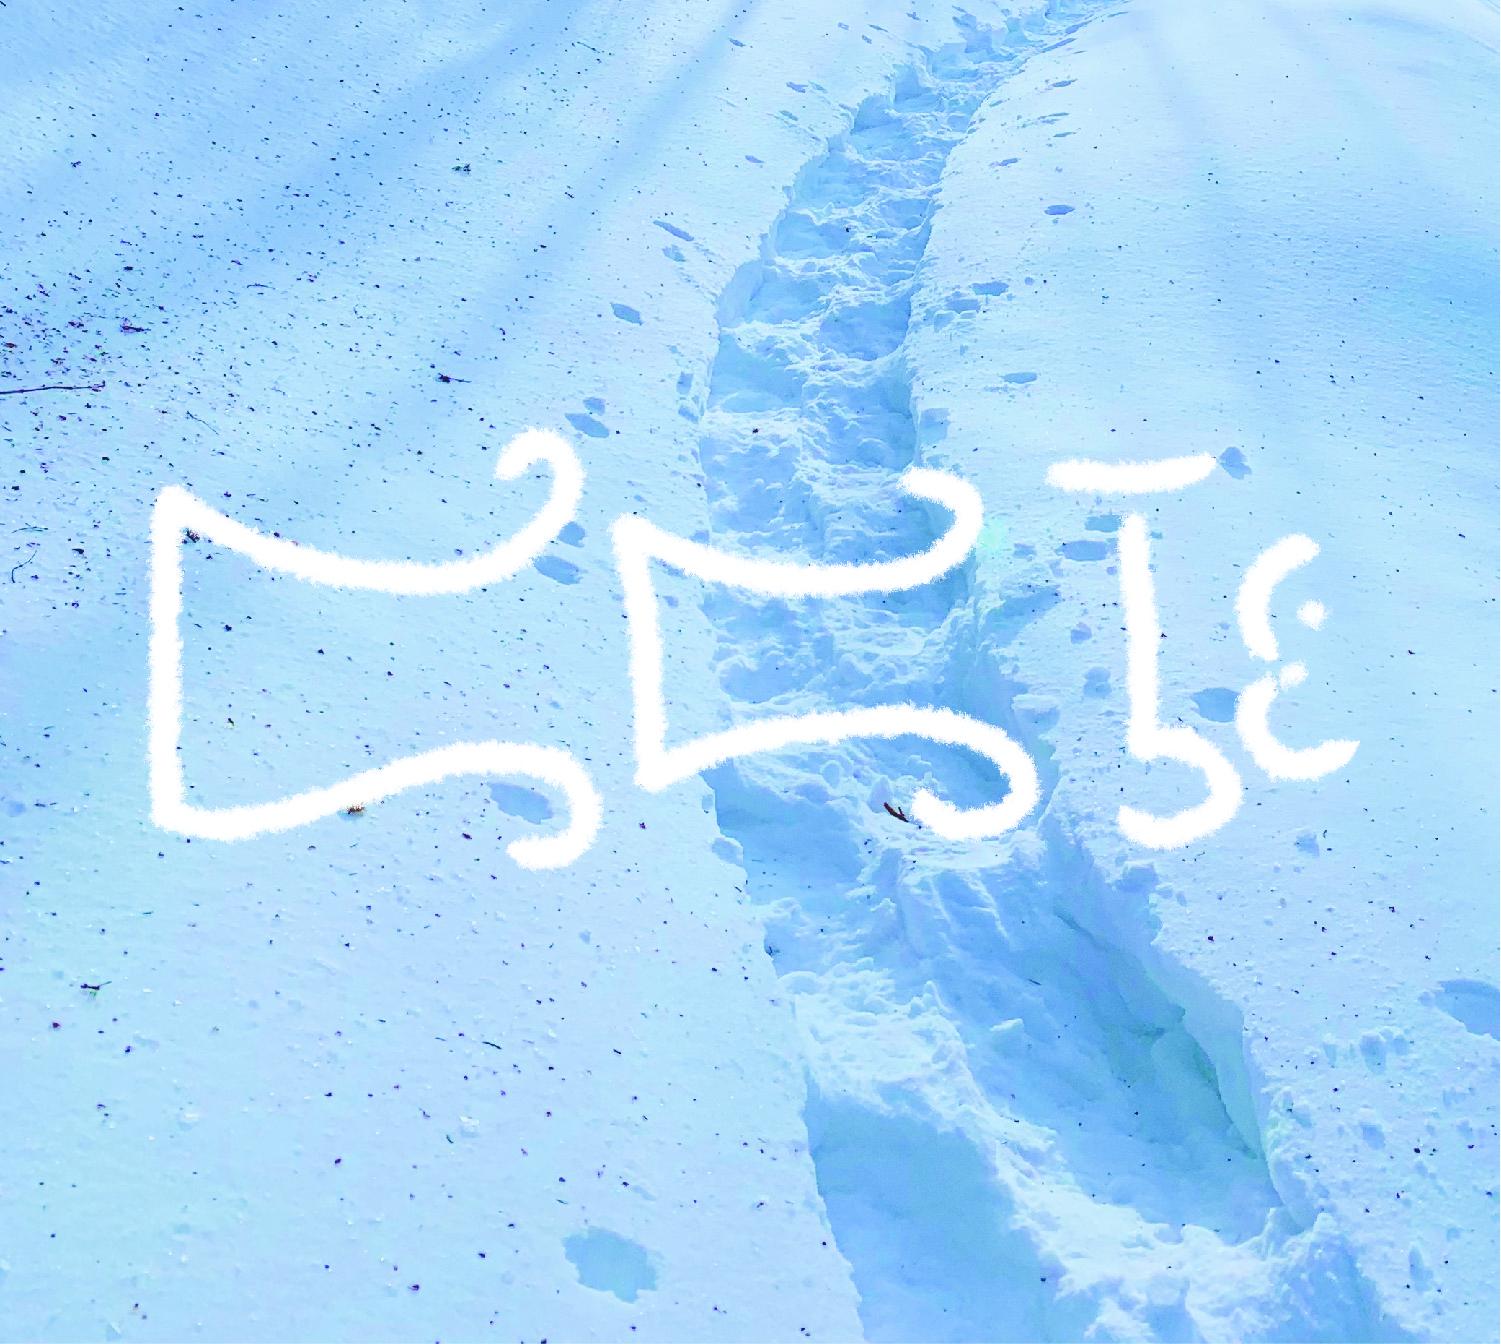 exhibition title in Mi’gmaw on a blue background of tracks in the snow